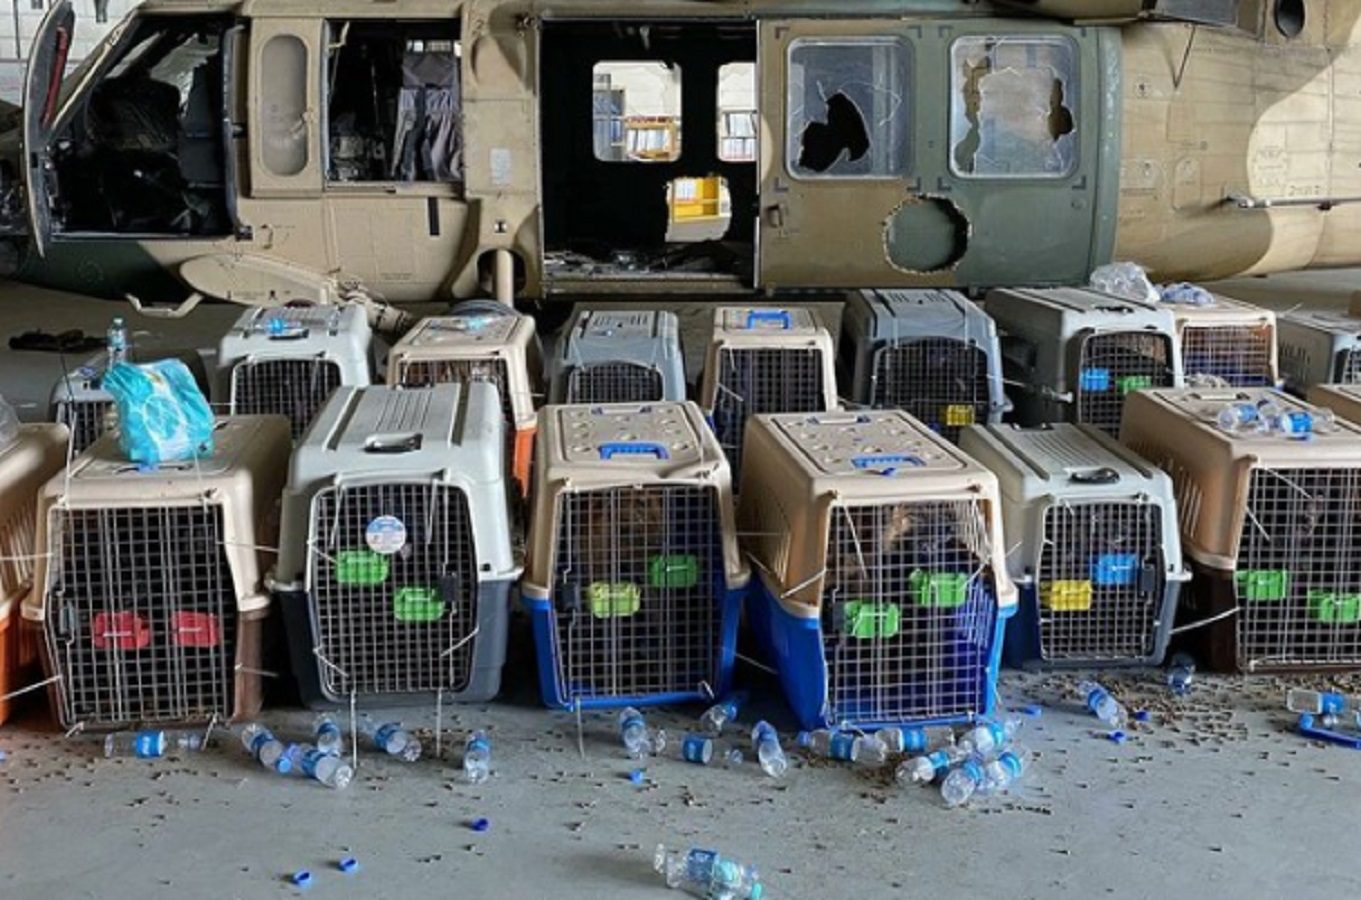 US Contract Working Dogs Abandoned at Kabul Airport After Last Plane Left | The Gateway Pundit | by Cassandra MacDonald